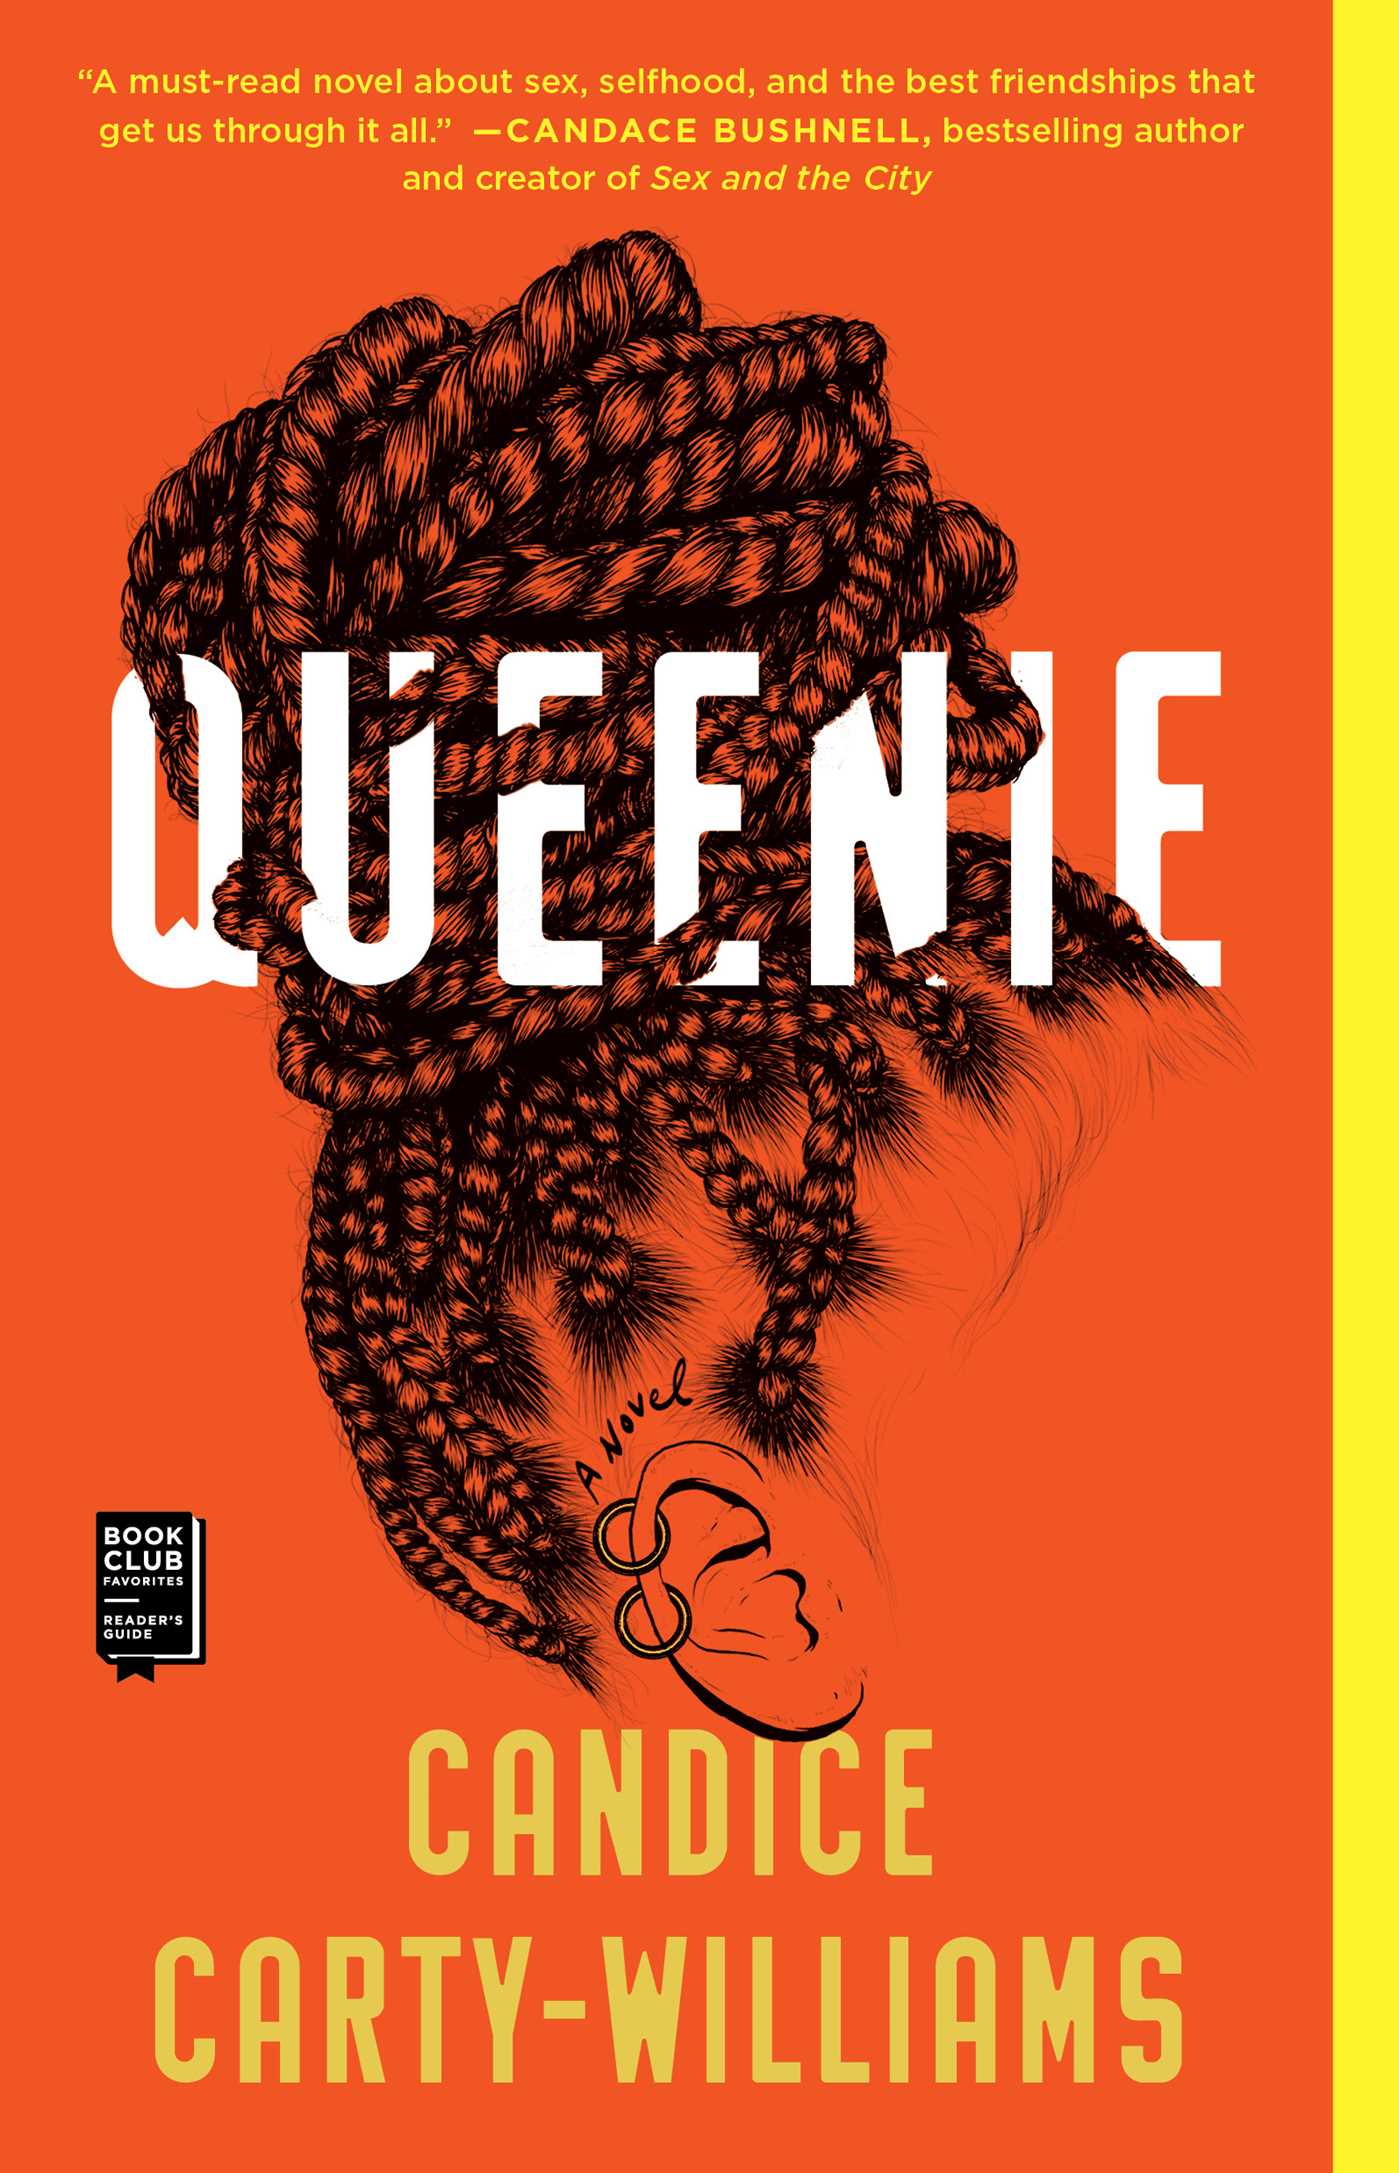 Queenie by Candice Carty-Williams is a good read if one wishes to get empowered.